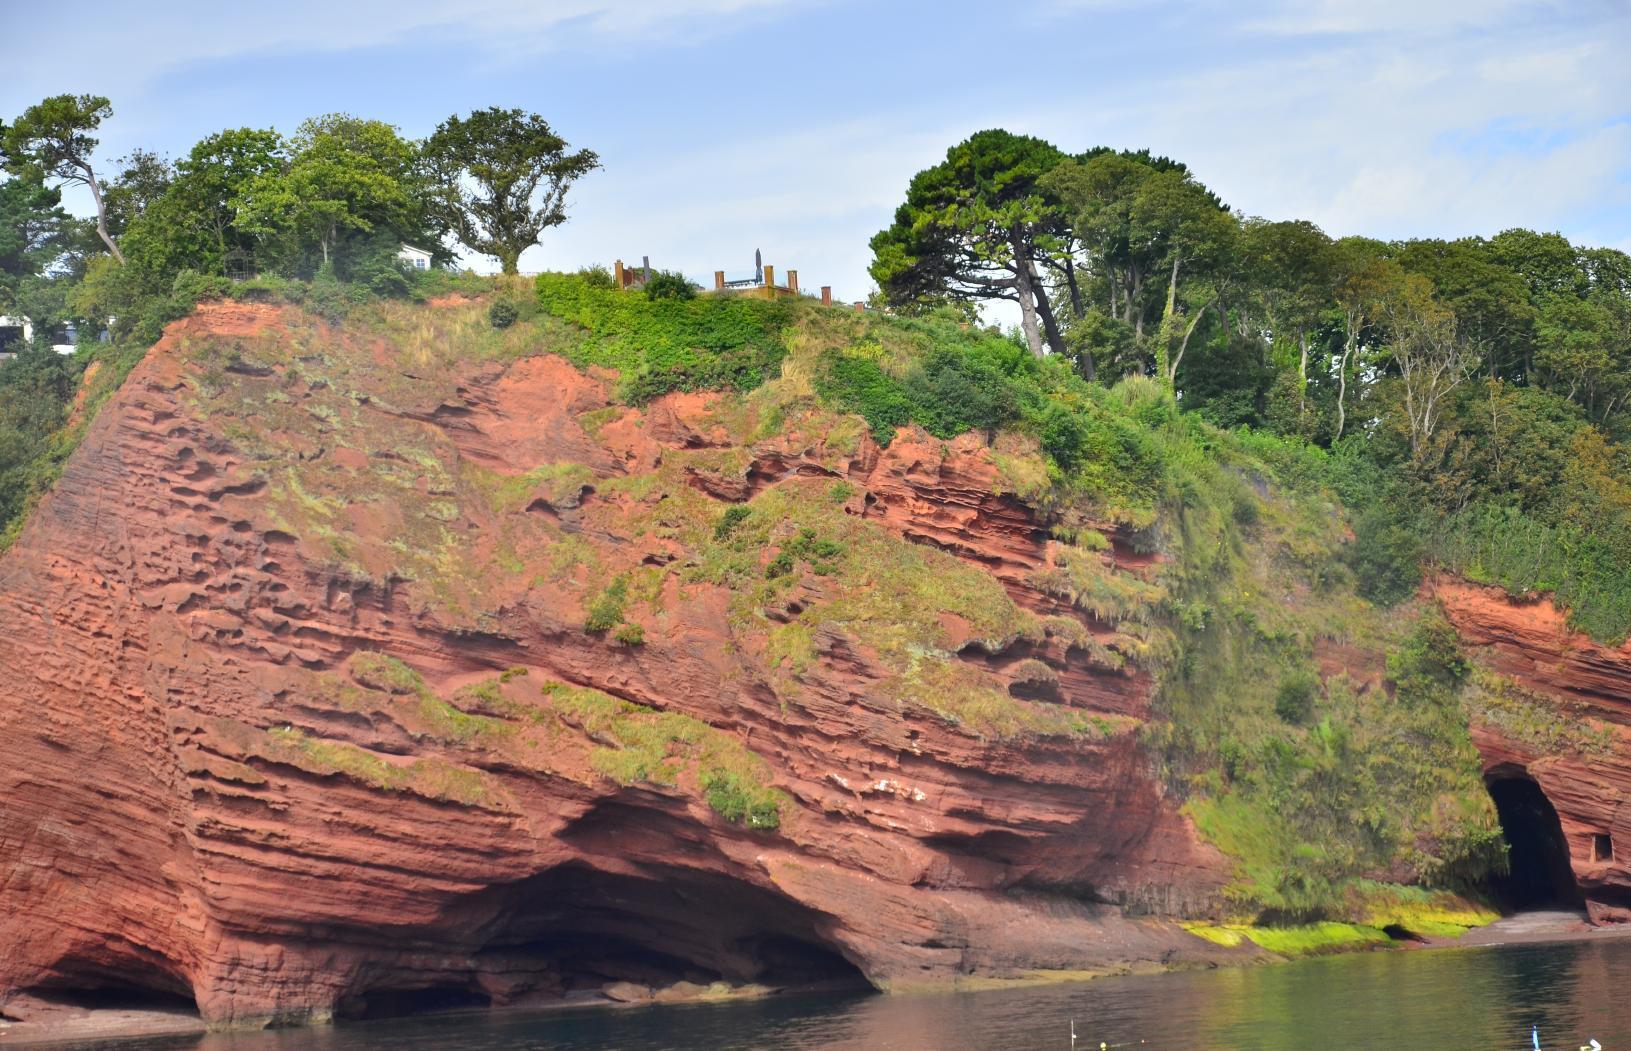 Sandstone cliff with erosion